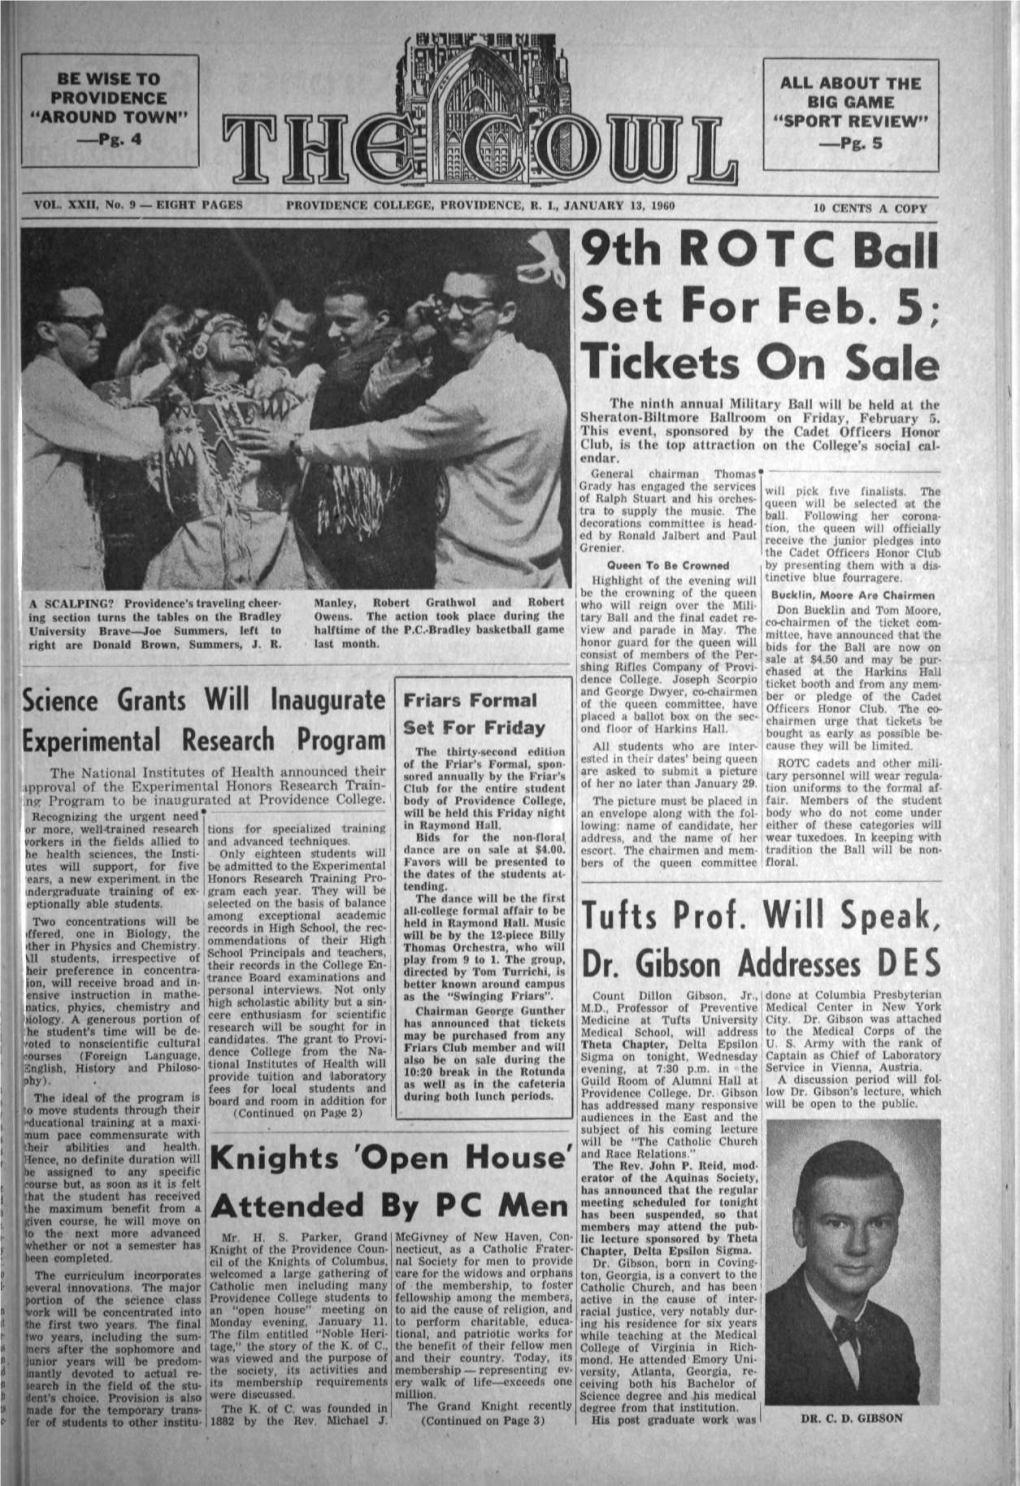 The Cowl, January 13, 1960